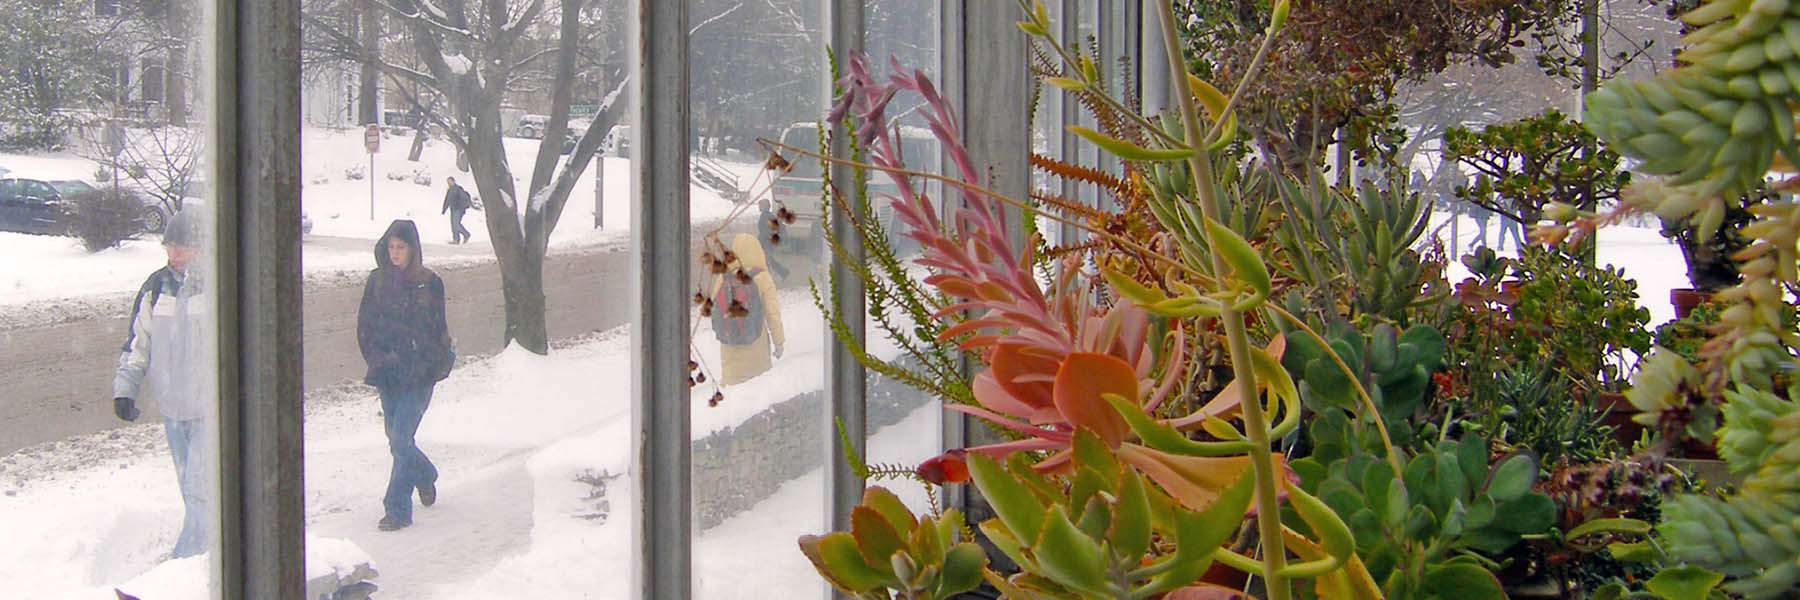 Looking outside from the cactus room to snow-covered streets and sidewalks.